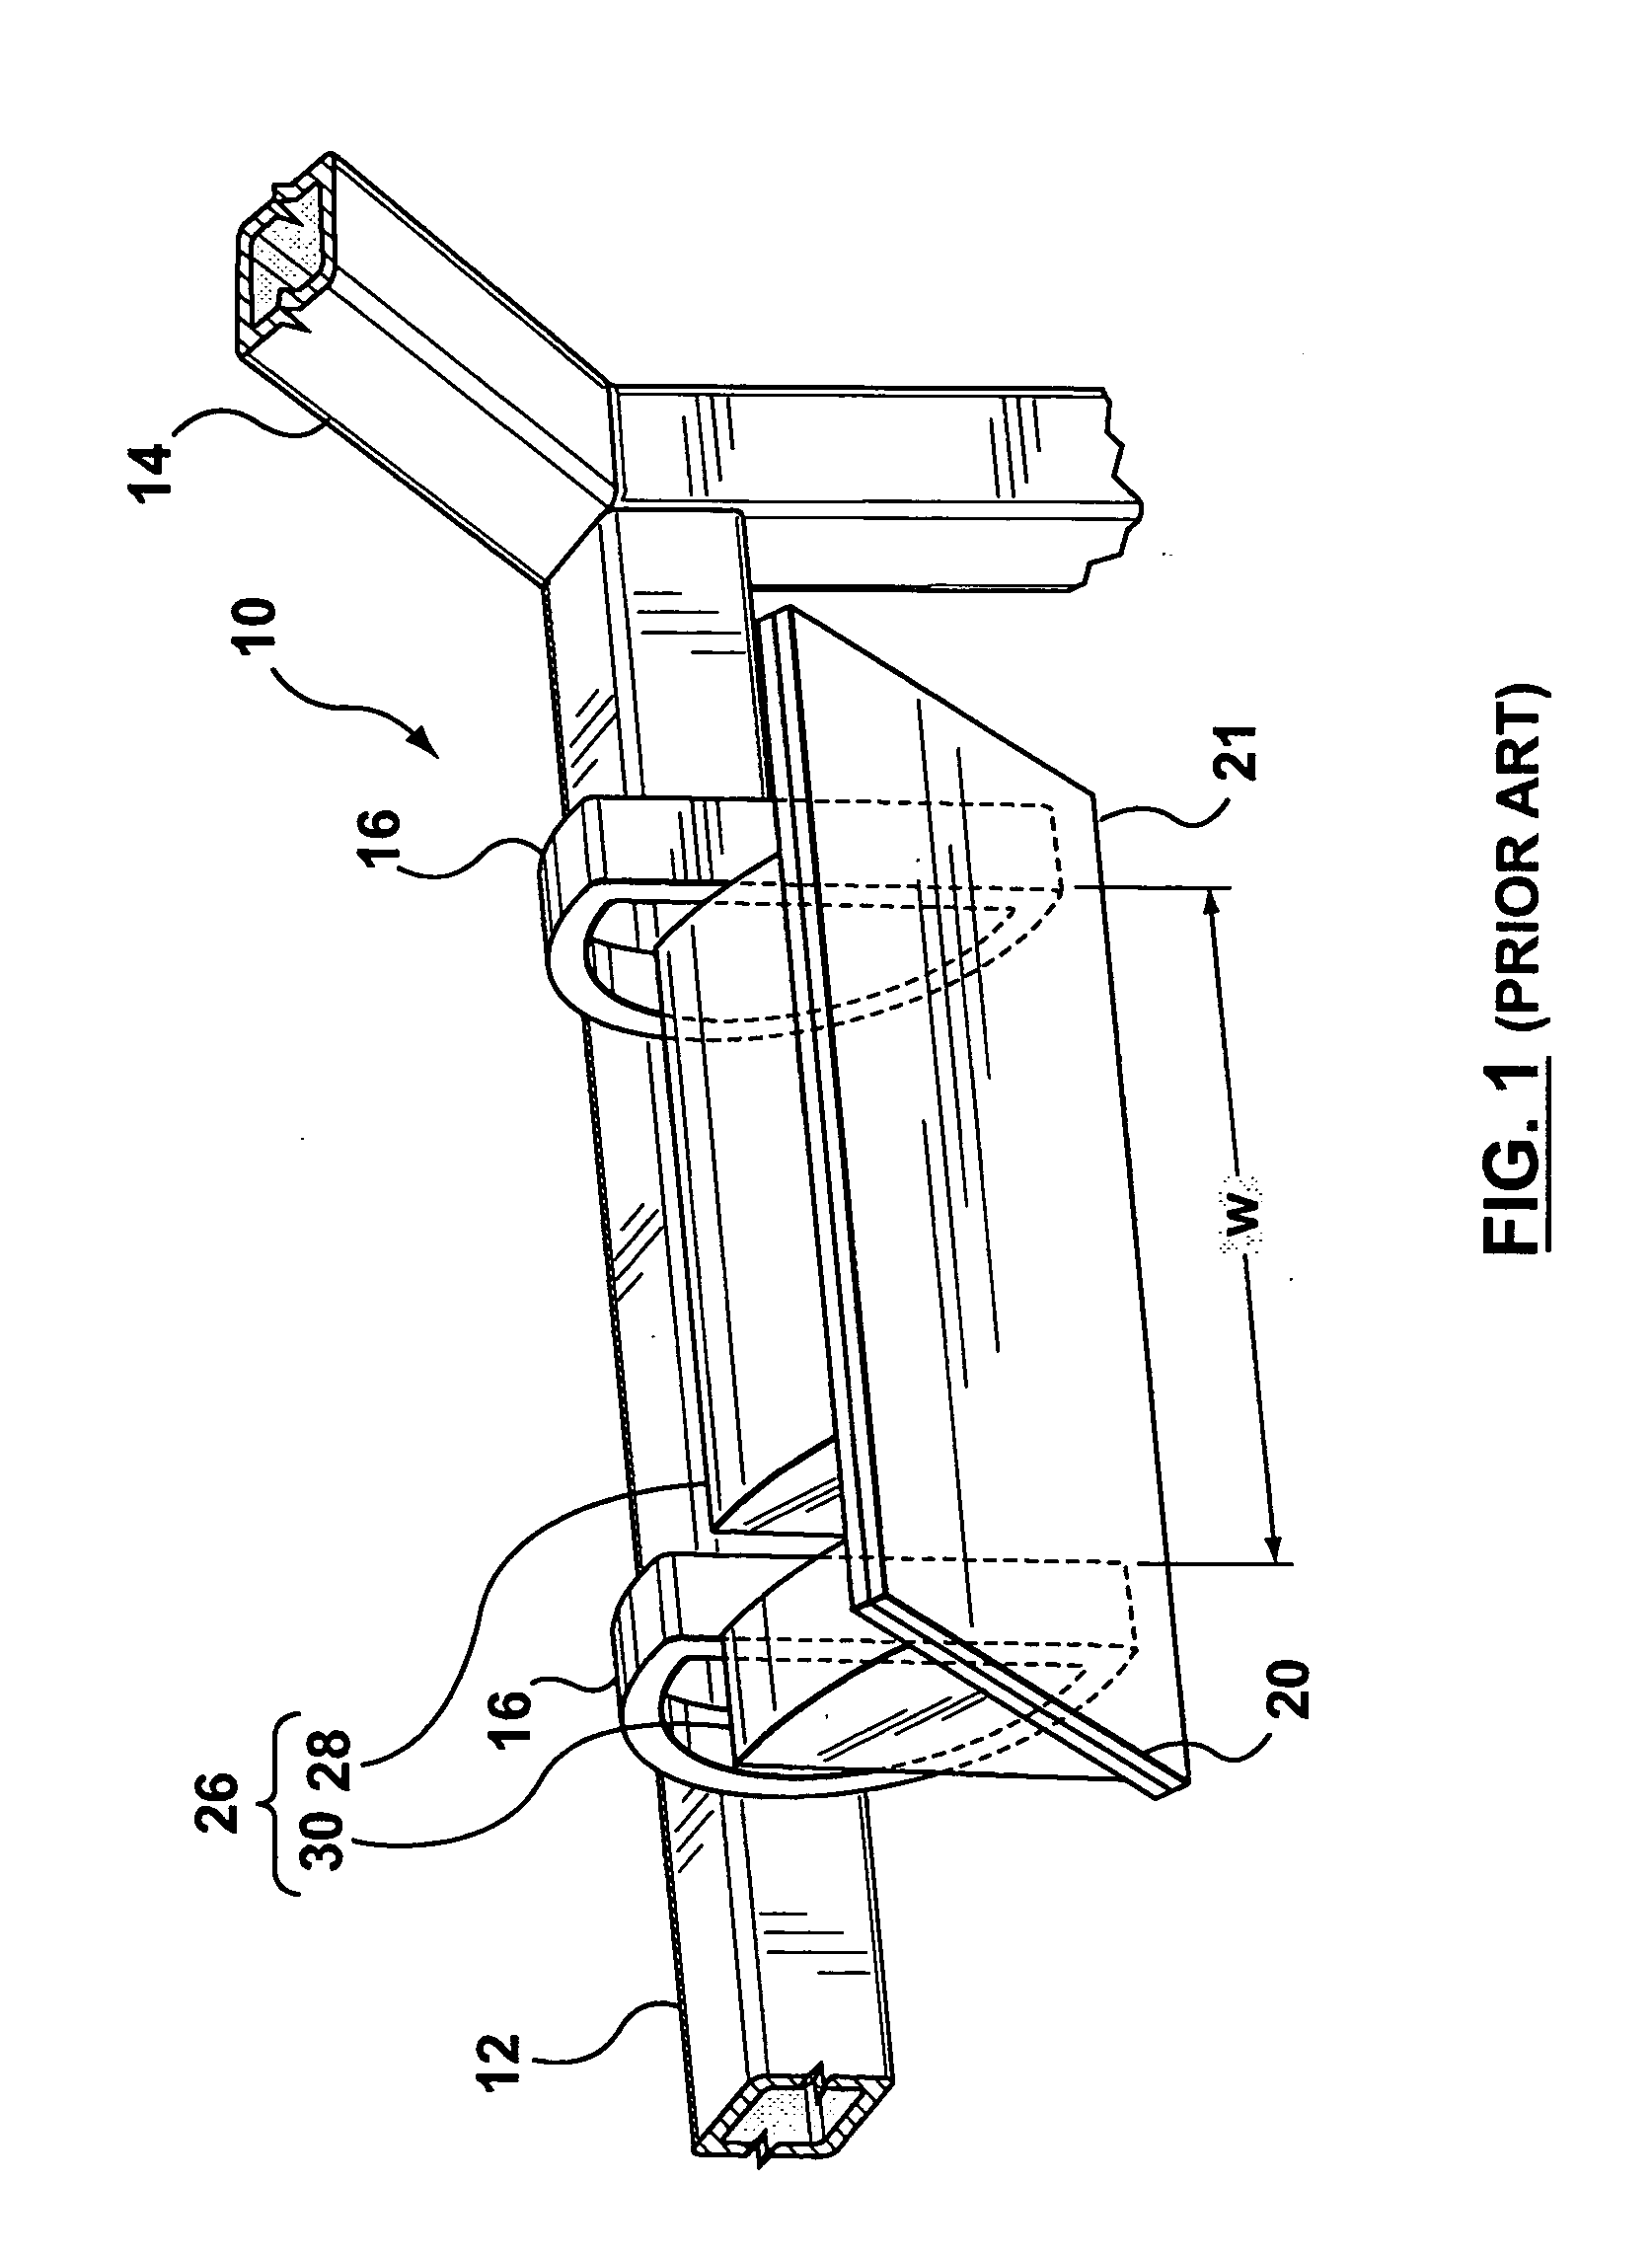 Instrument panel subassembly including a glove box door